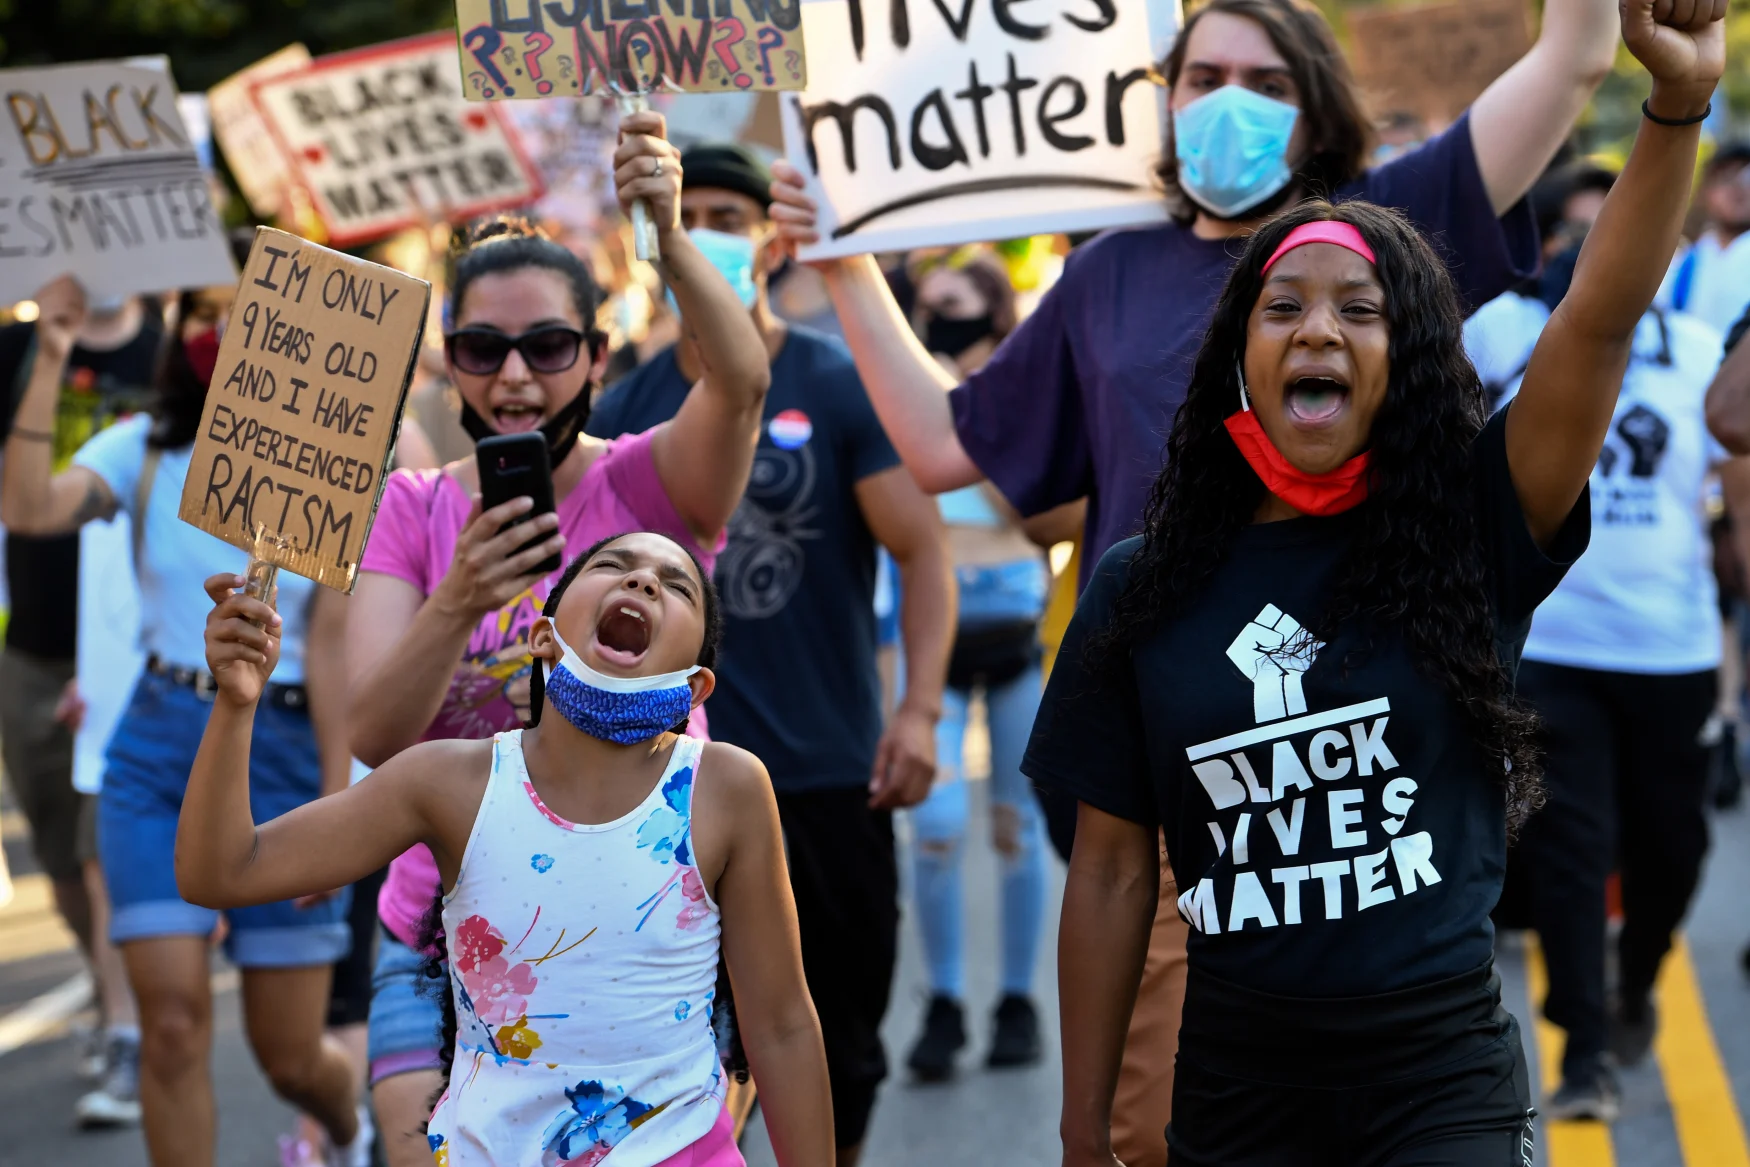 Garden City, N.Y.: Cristiana Gant, 9, of Rockville Centre, New York, left, shouts alongside fellow activists during a protest in Garden City against police brutality in the wake of the Death of George Floyd, on June 23, 2020. (Photo by Steve Pfost/Newsday RM via Getty Images)